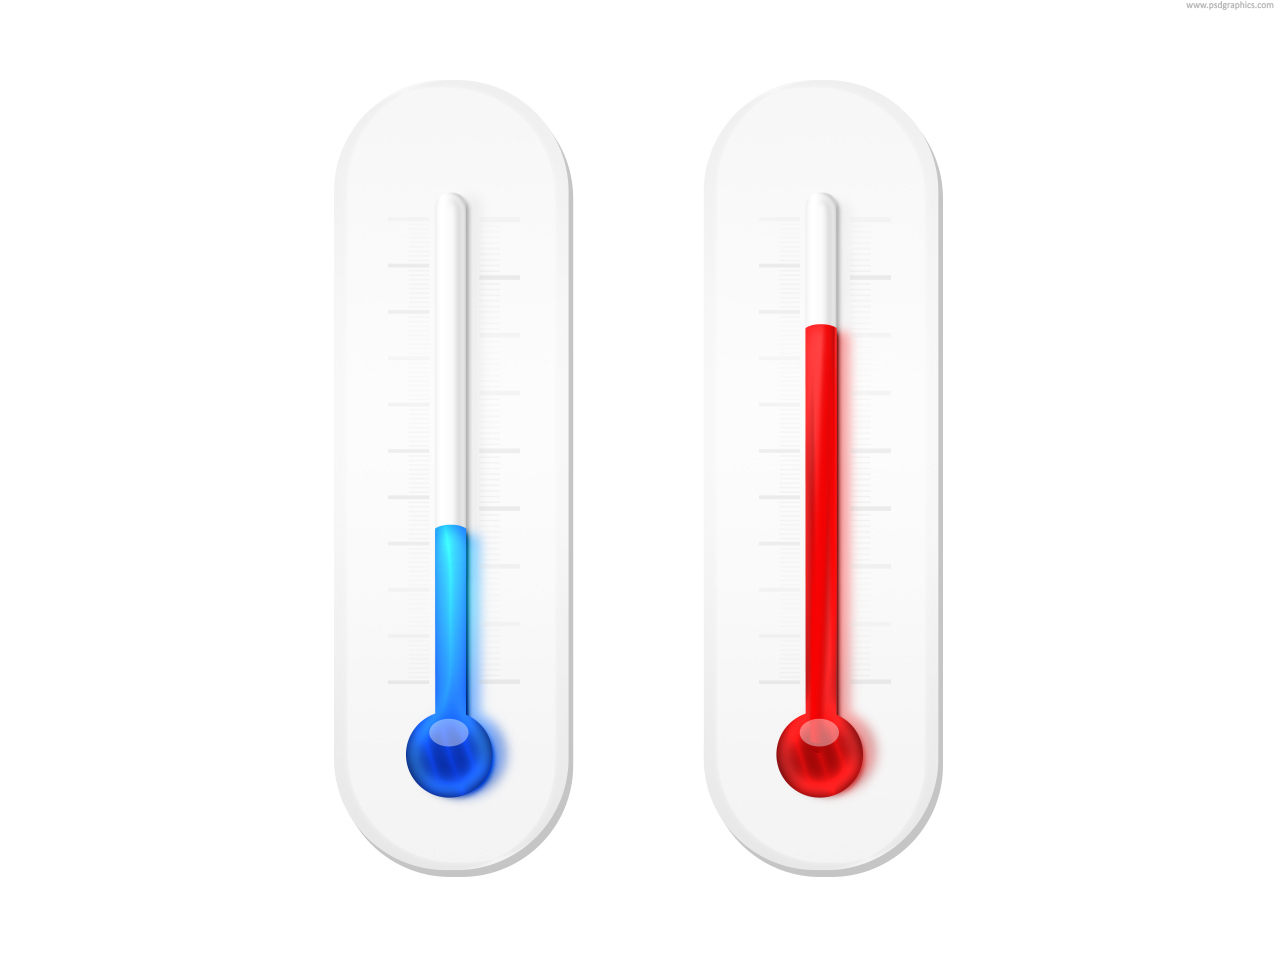 Winter And Summer Thermometers Icon  Psd    Psdgraphics